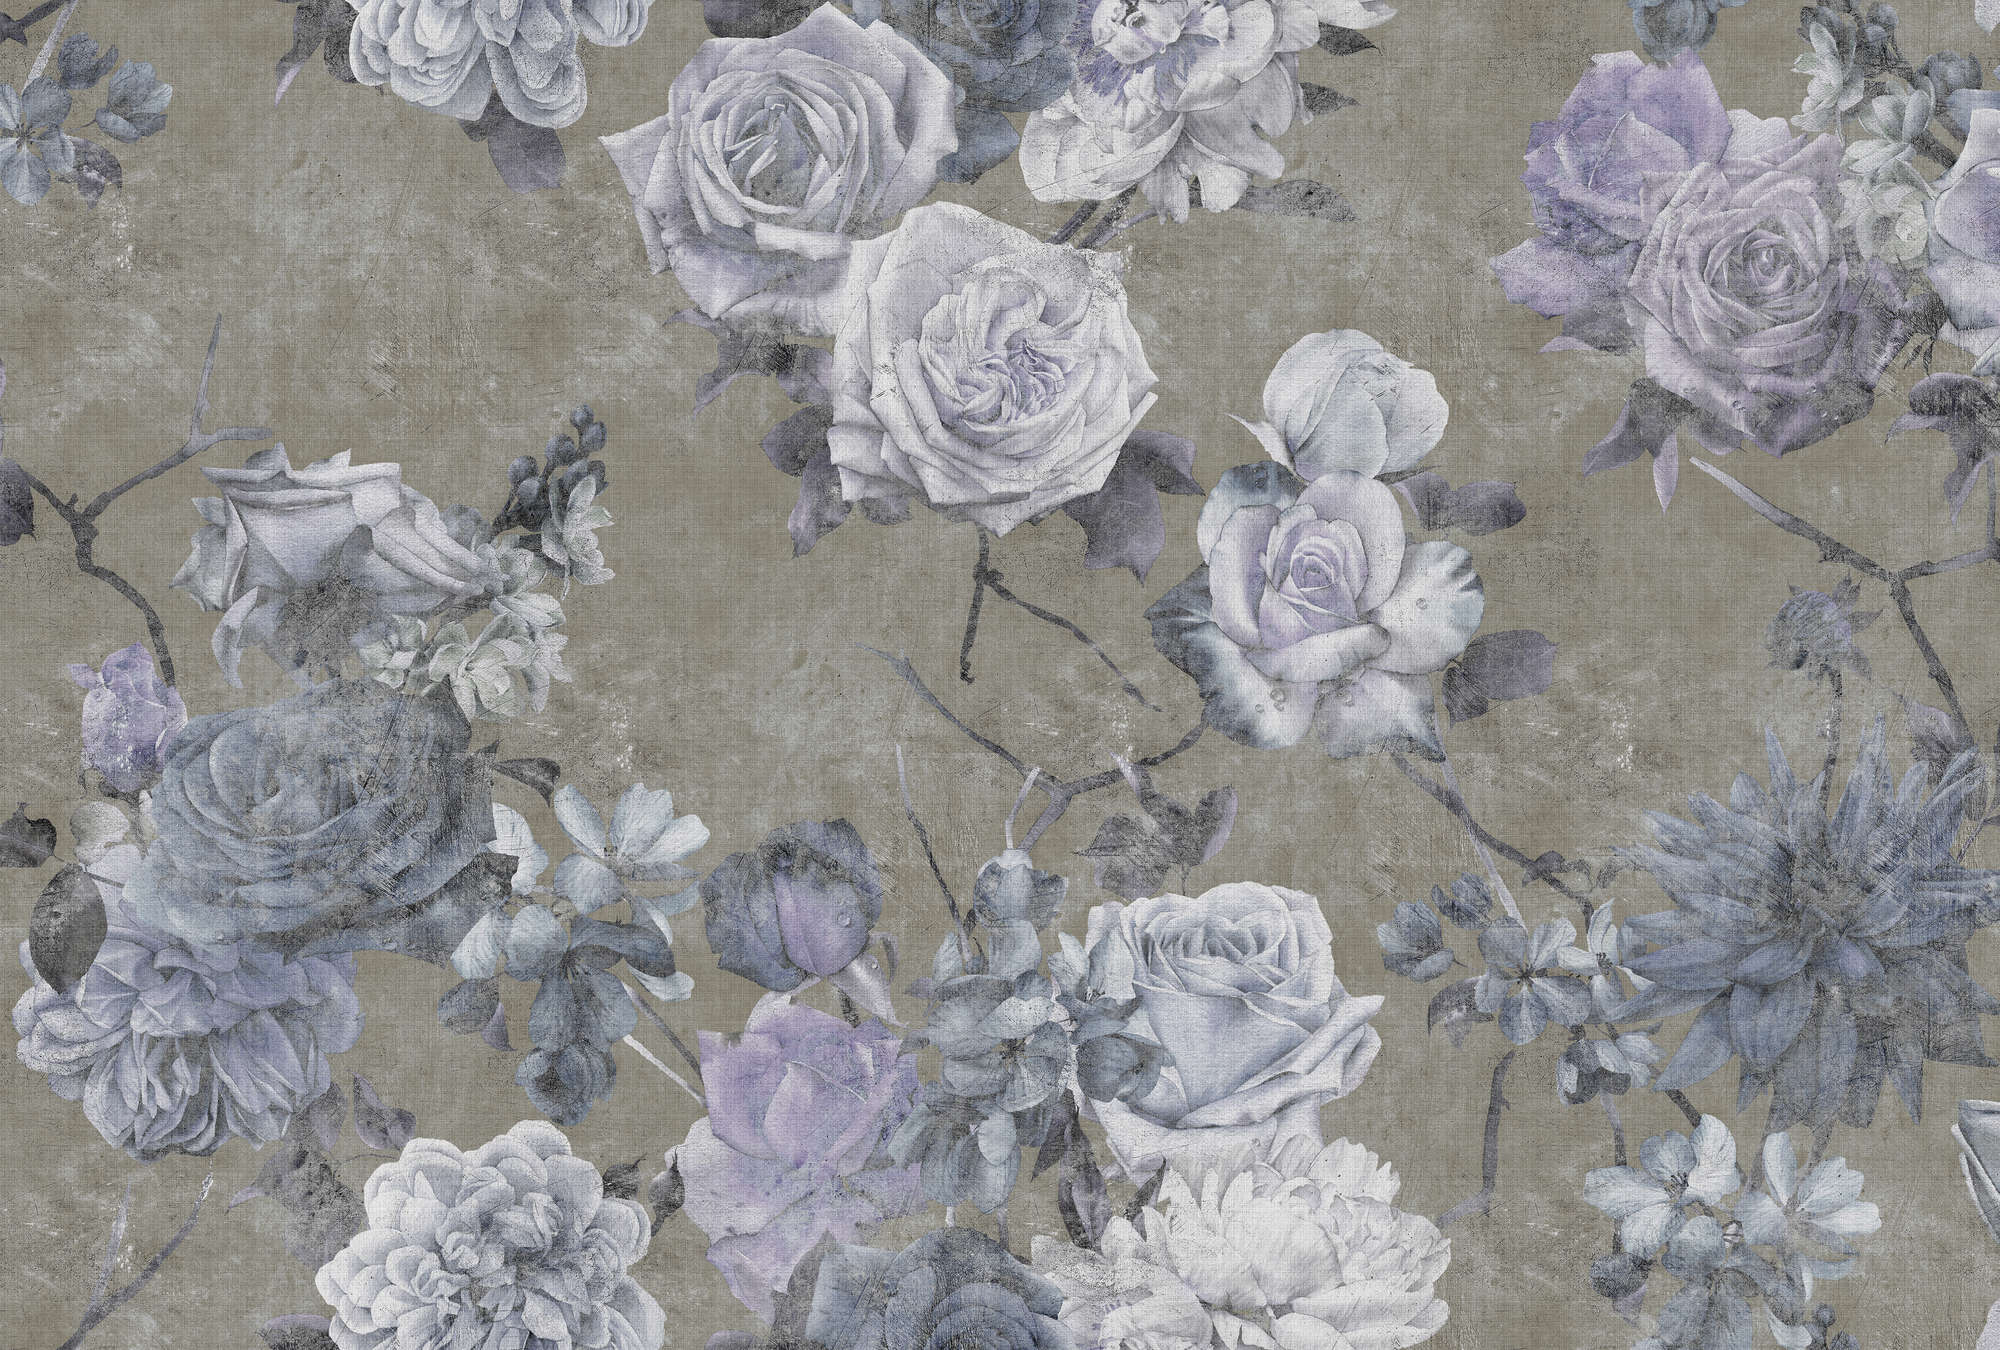             Sleeping Beauty 1 - Wallpaper in natural linen structure rose blossoms in used look - Blue, Taupe | Matt smooth fleece
        